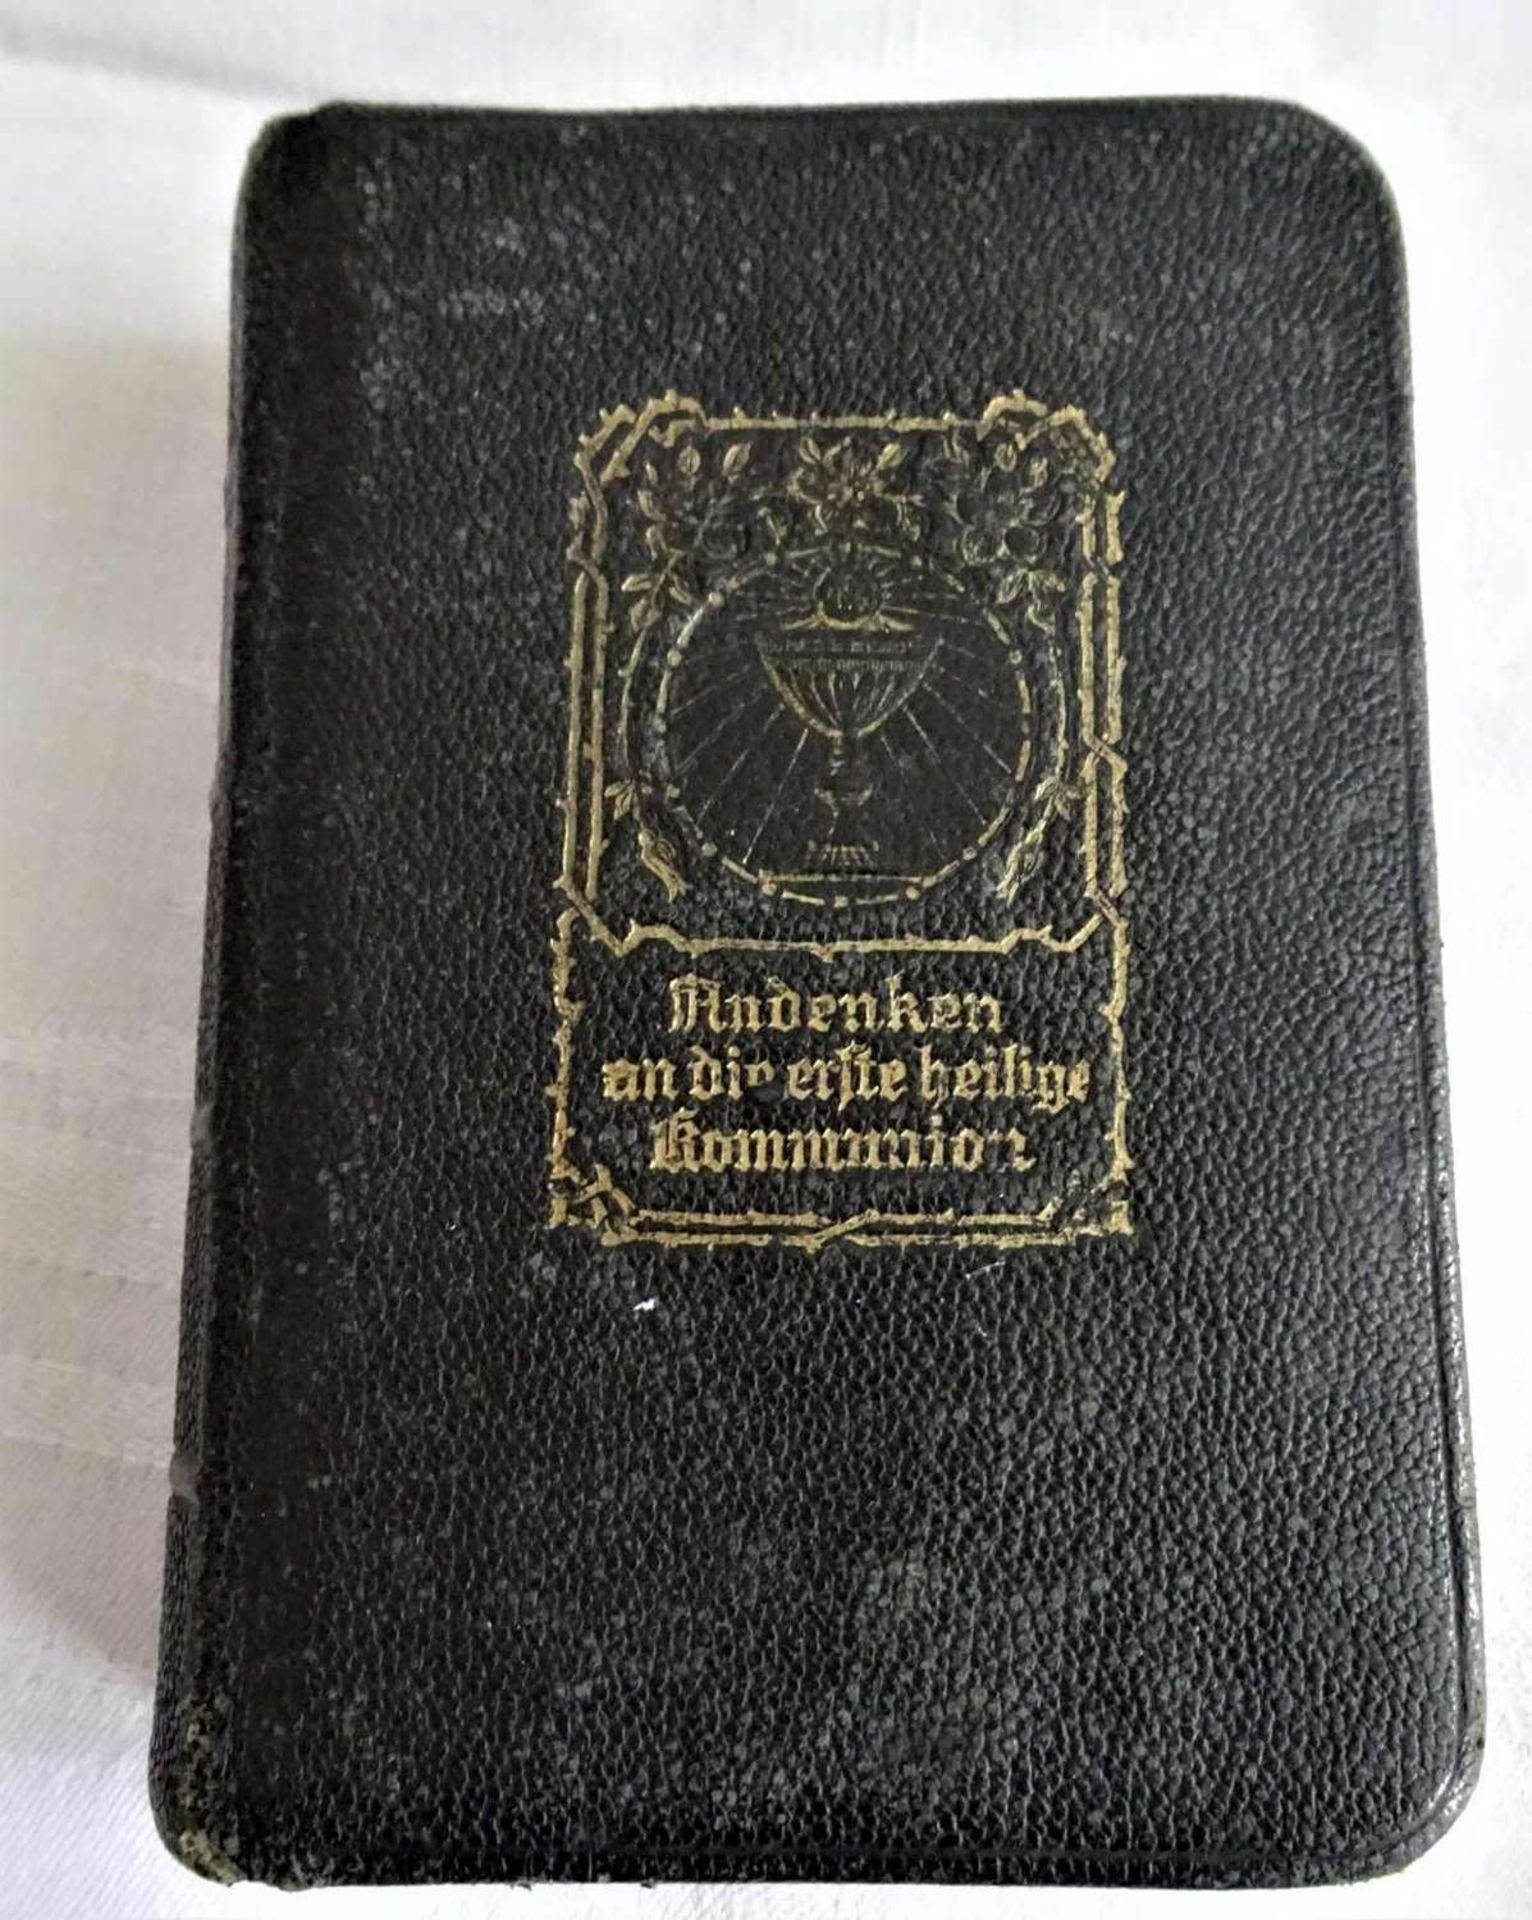 "Souvenir of the First Holy Communion", Prayer Book of 1912, used condition